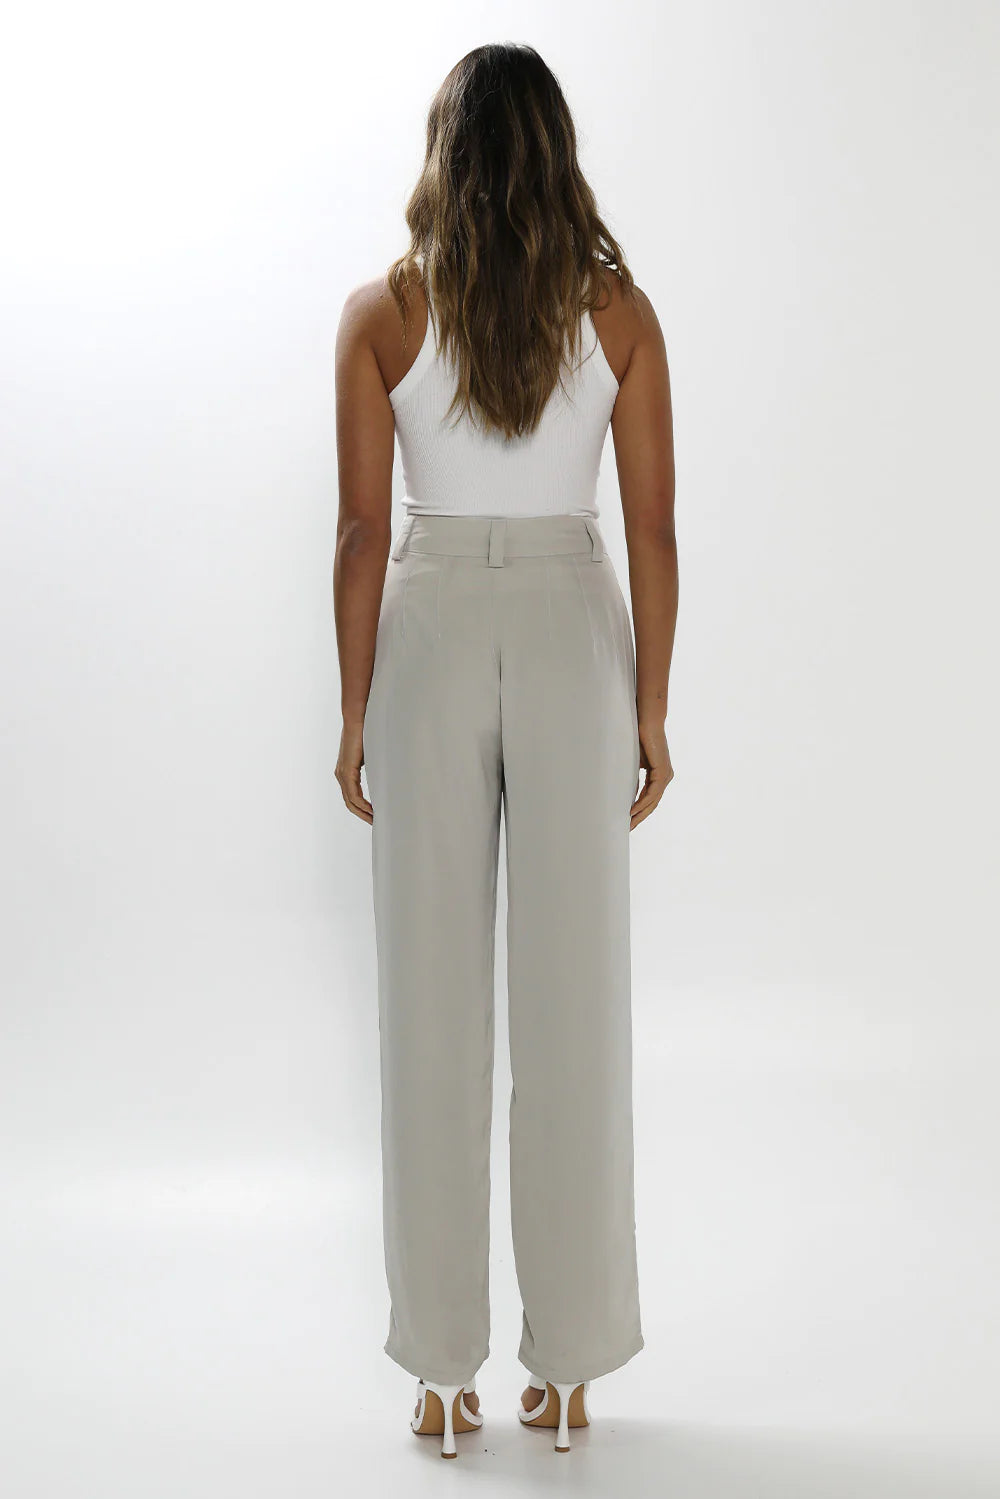 Madison The Label Giselle Pants